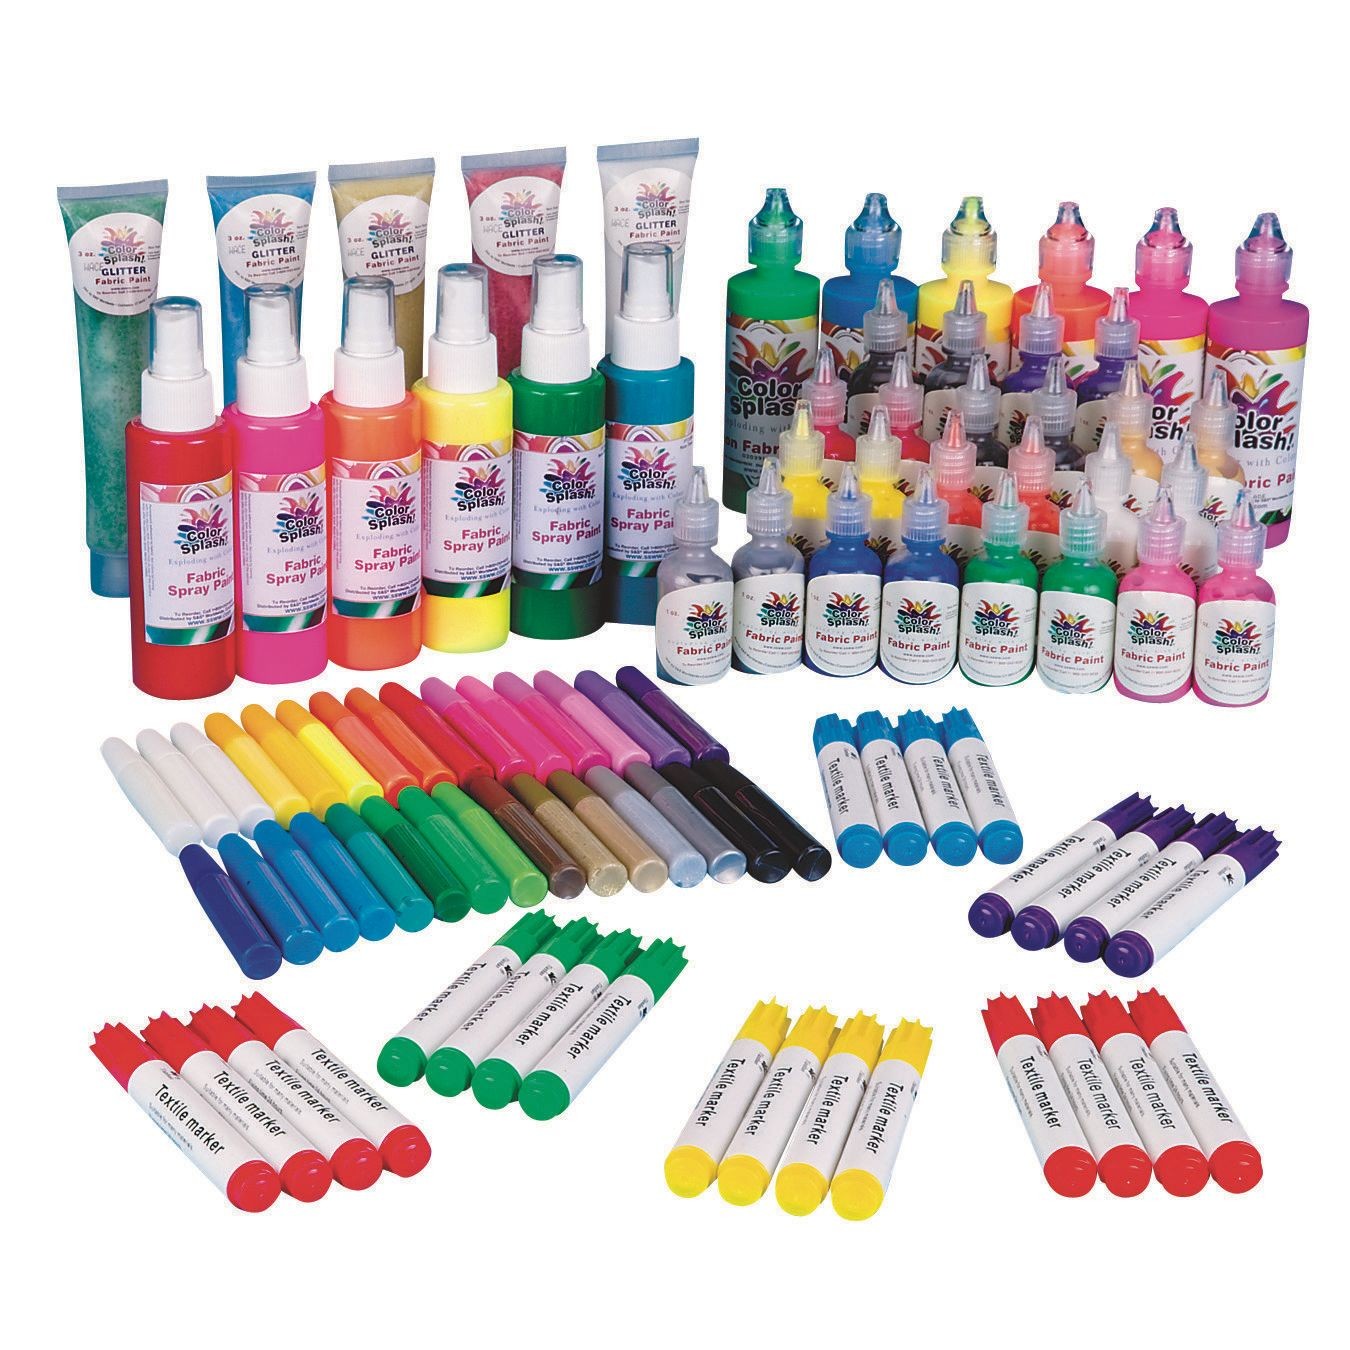 Color Splash! Fabric Painting Easy Pack from S&S Worldwide